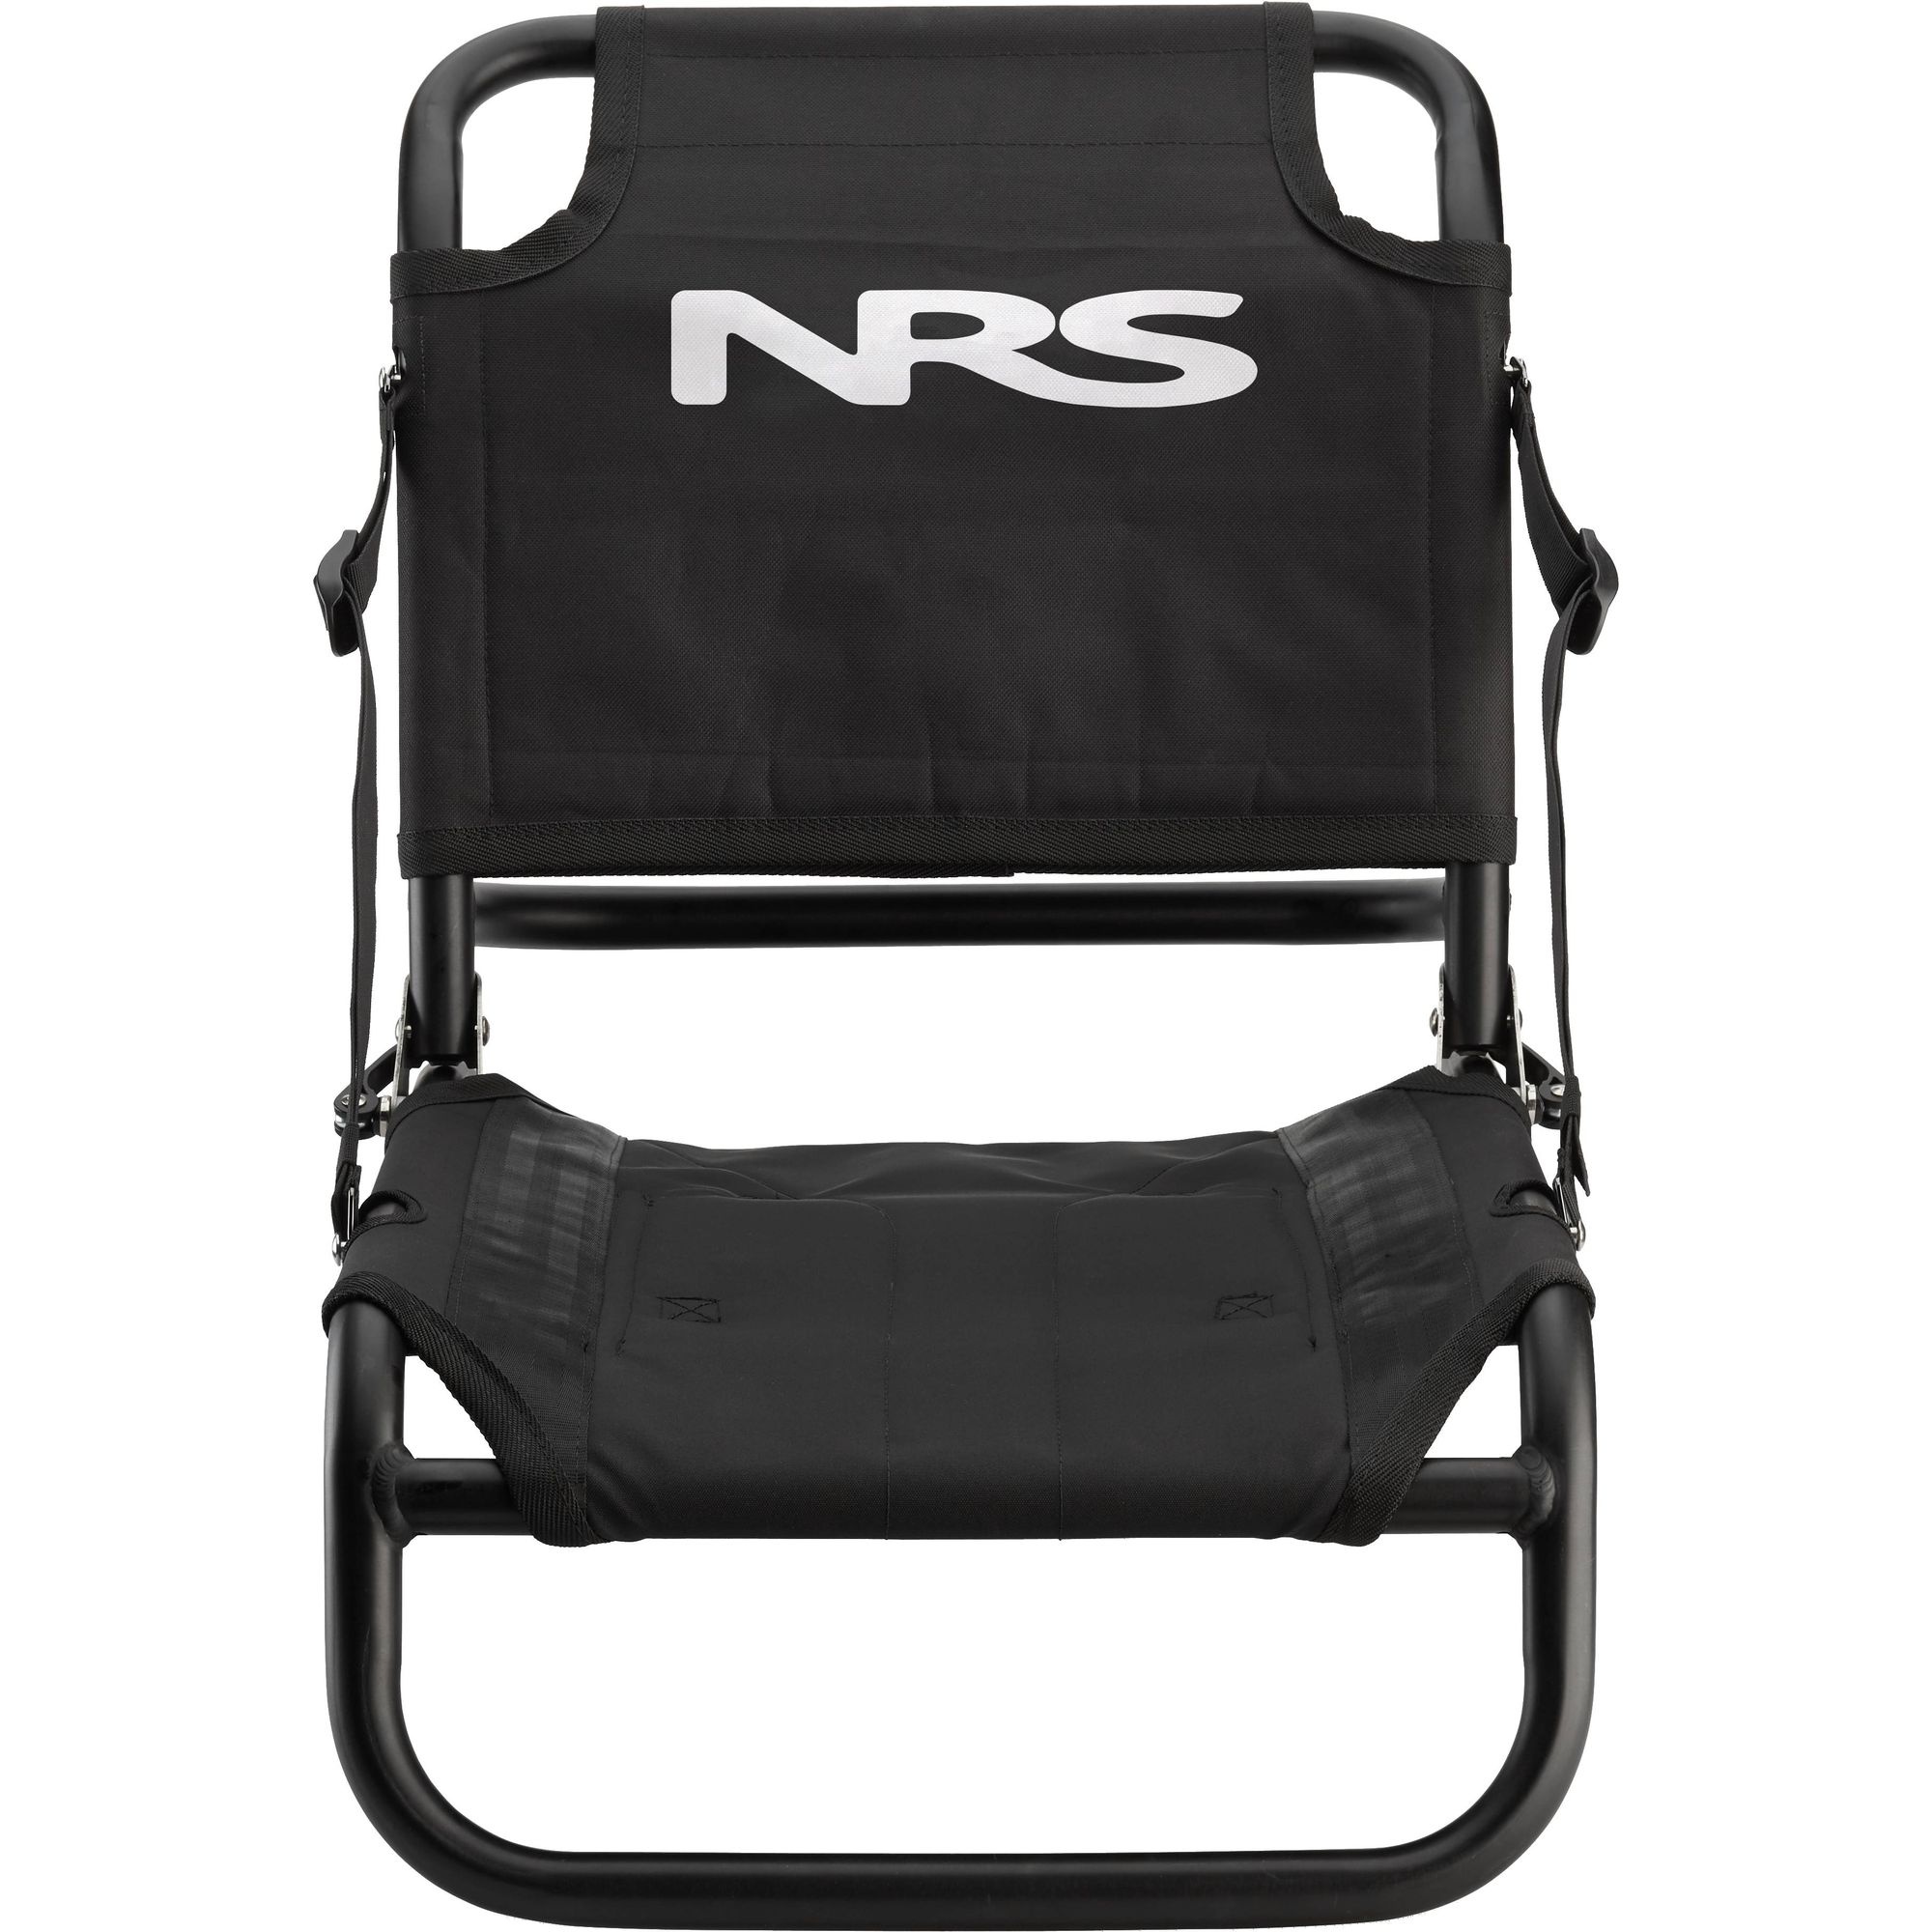 NRS NRS Fishing Seat For Inflatable Kayaks